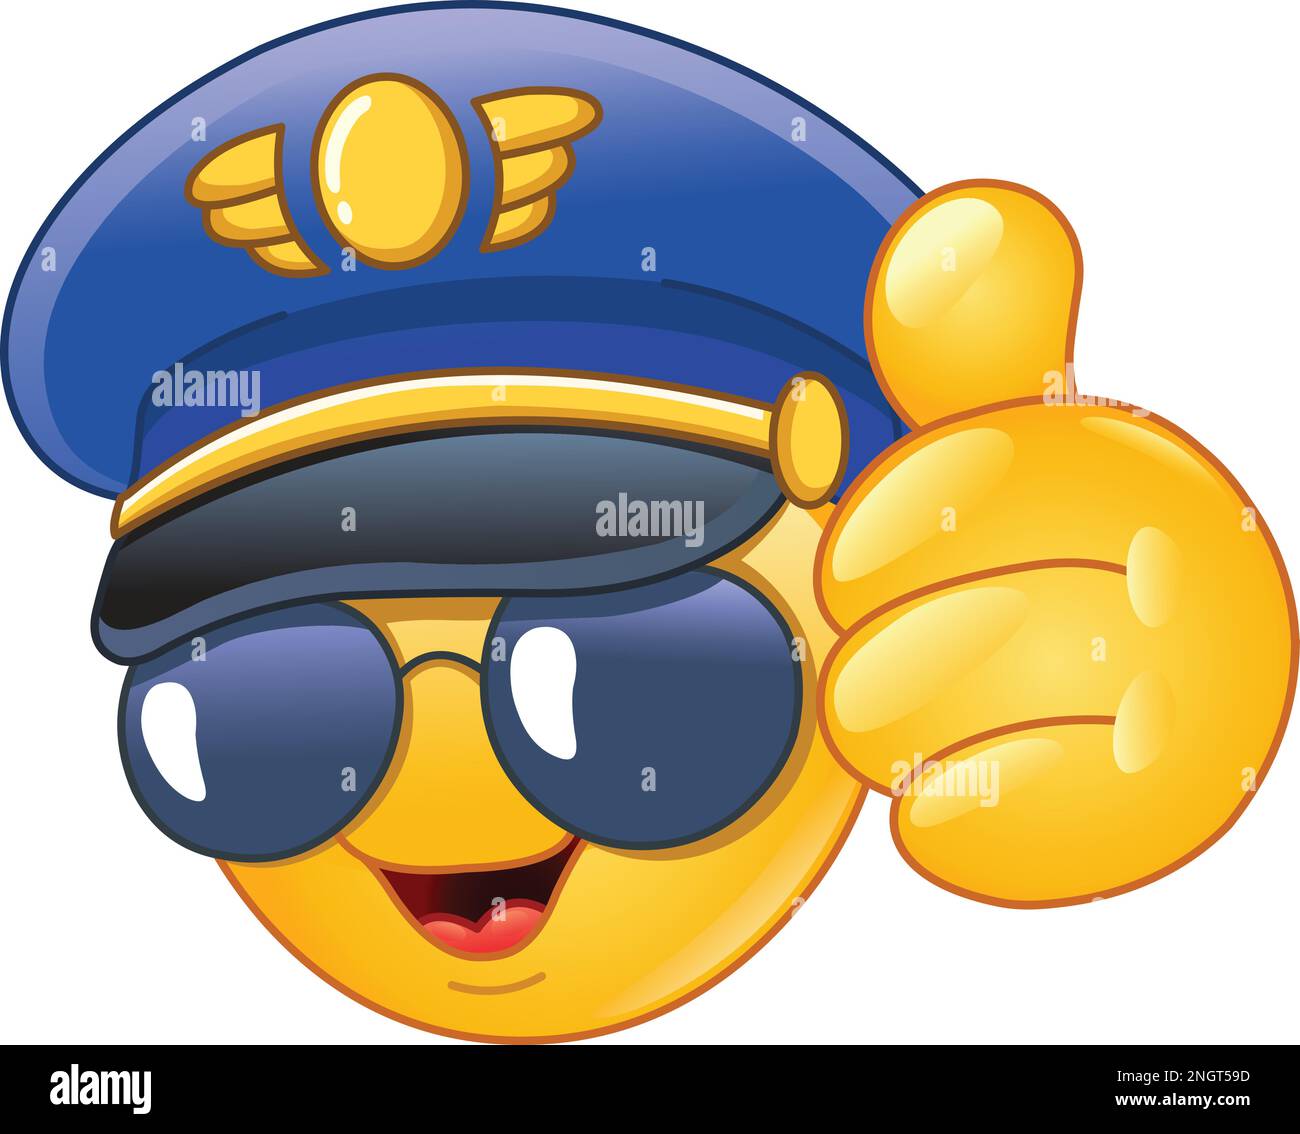 Pilot emoji emoticon showing thumb up, like gesture Stock Vector